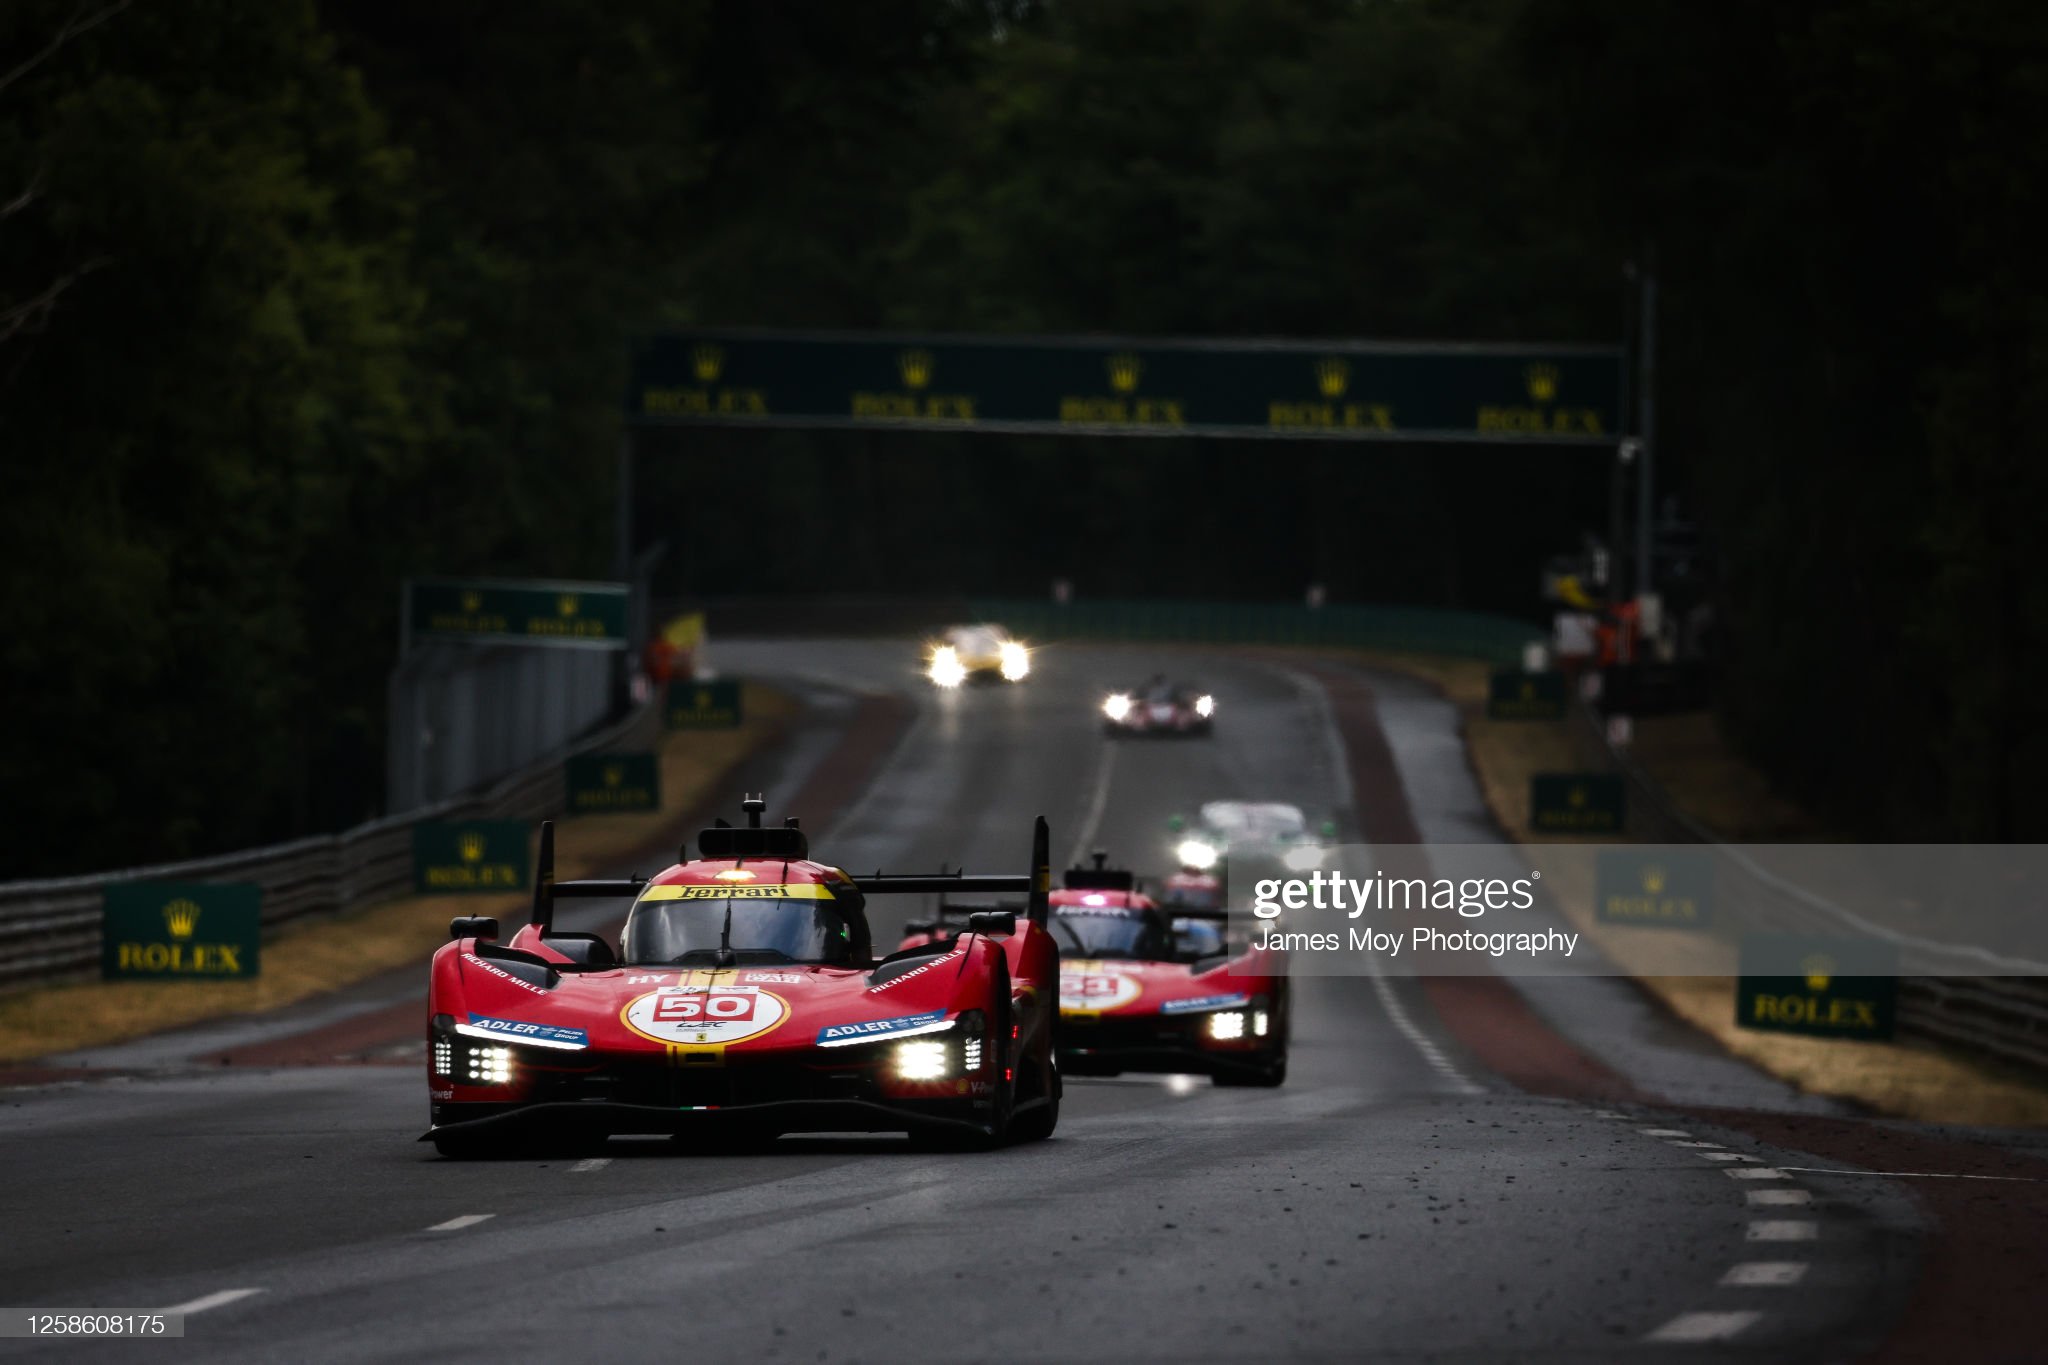 The n. 50 Ferrari 499P of Antonio Fuoco, Miguel Molina and Nicklas Nielsen in action during the 100th anniversary of the 24 Hours of Le Mans at the Circuit de la Sarthe on June 10, 2023 in Le Mans, France. 